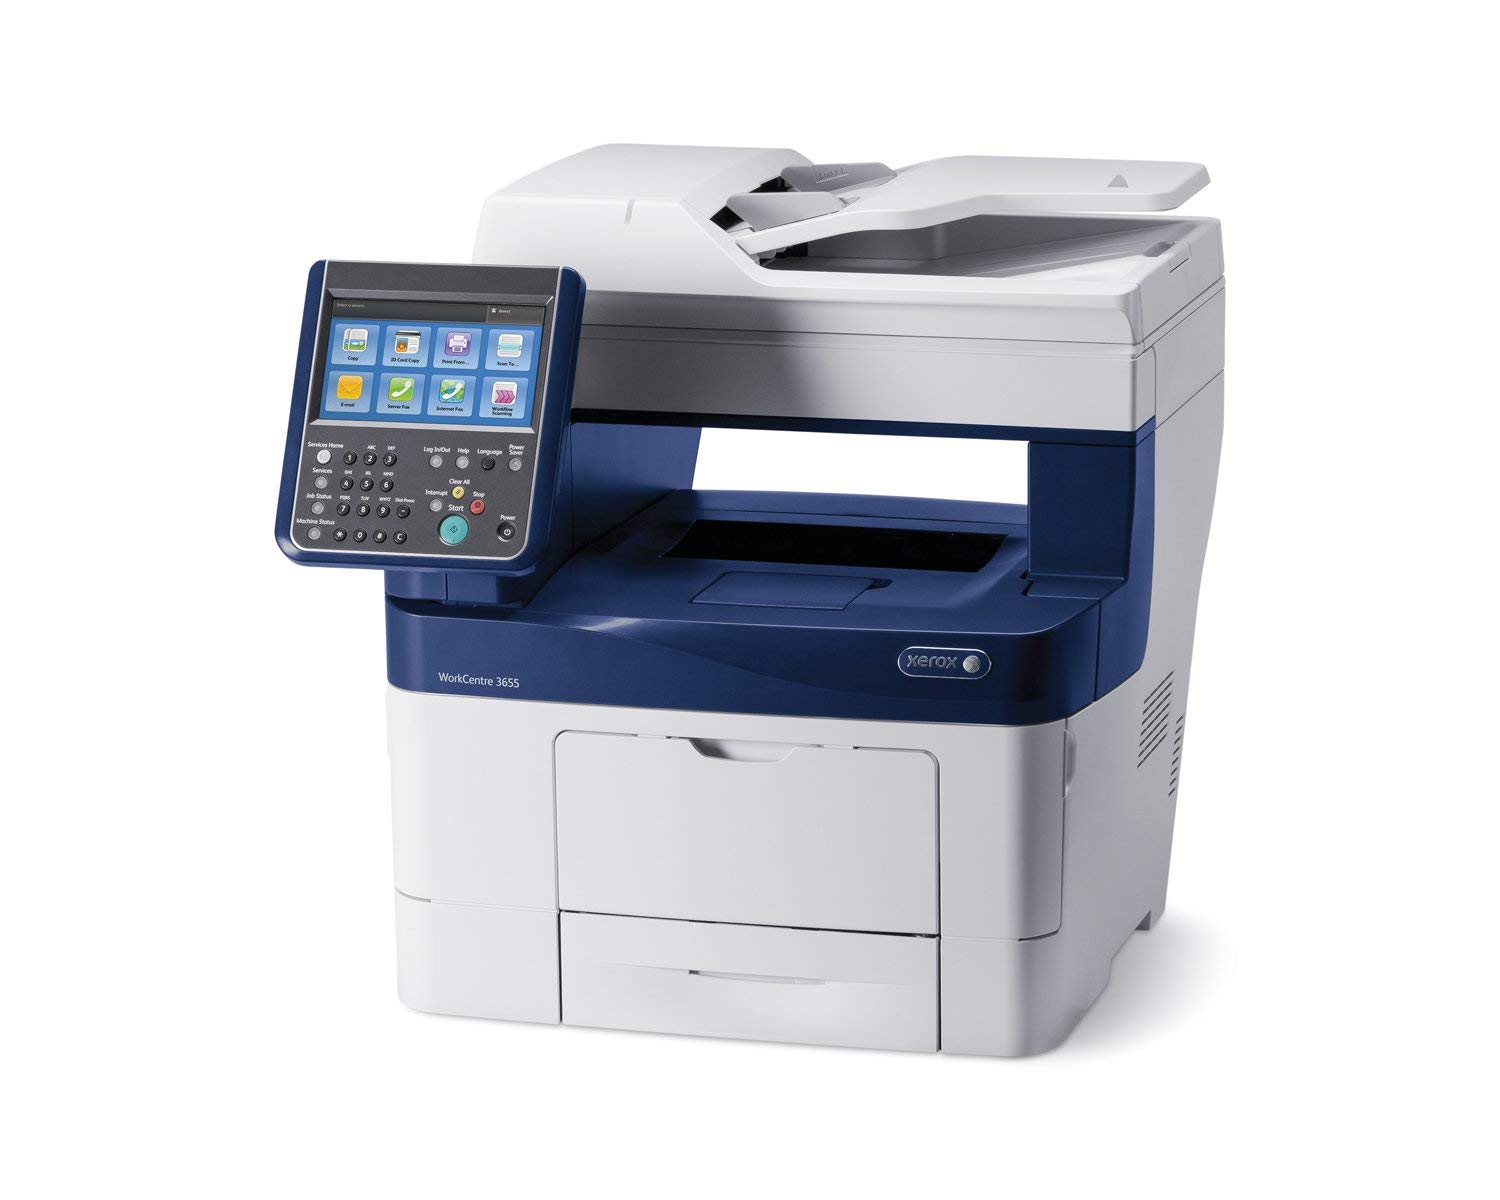 Xerox Work Center 3655 Multifunction LASER BLACK AND WHITE A4 45ppm 1200 x 1200 Duplex Network Front/Back